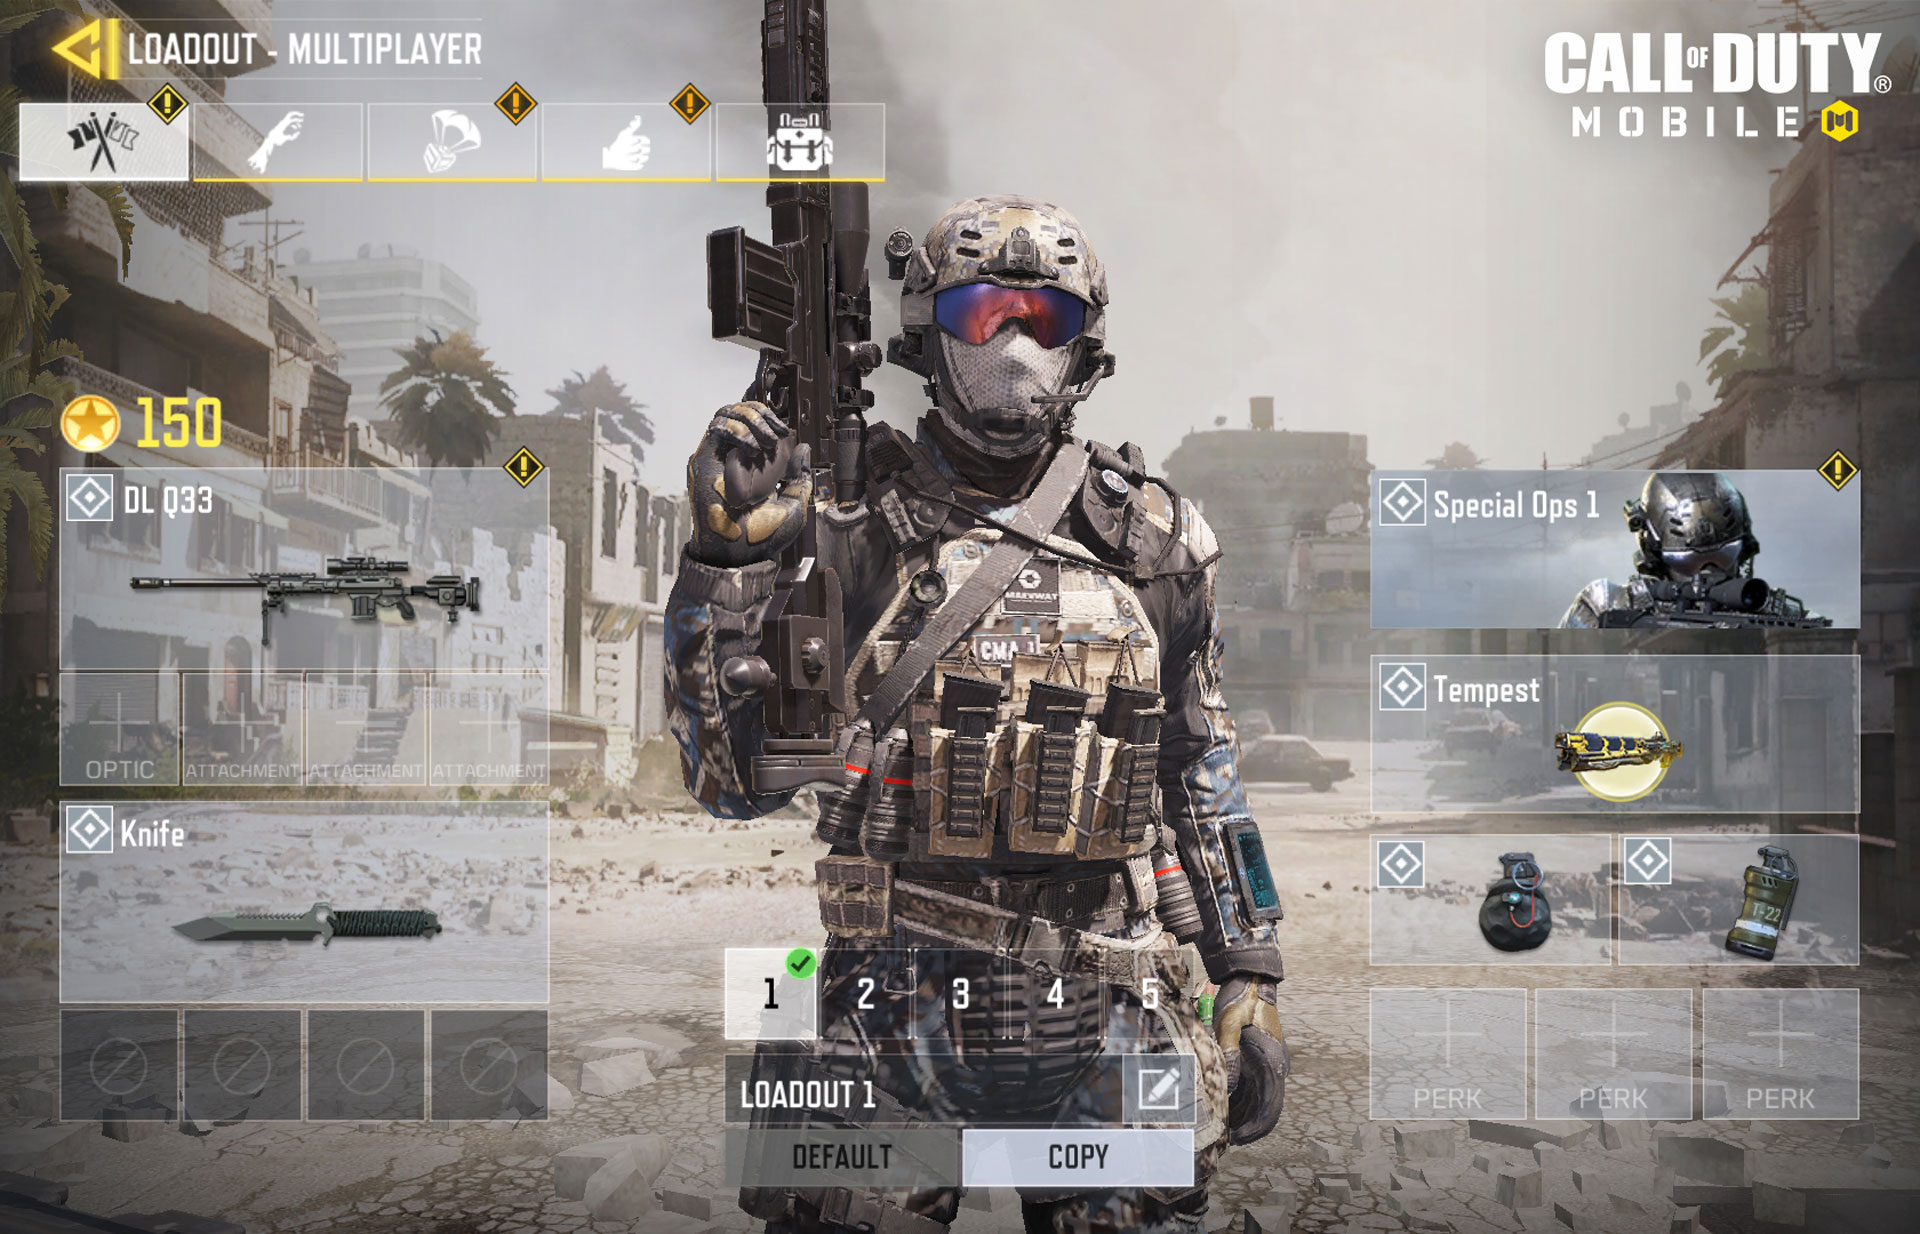 Multiplayer - Call of Duty: Mobile Guide - IGN